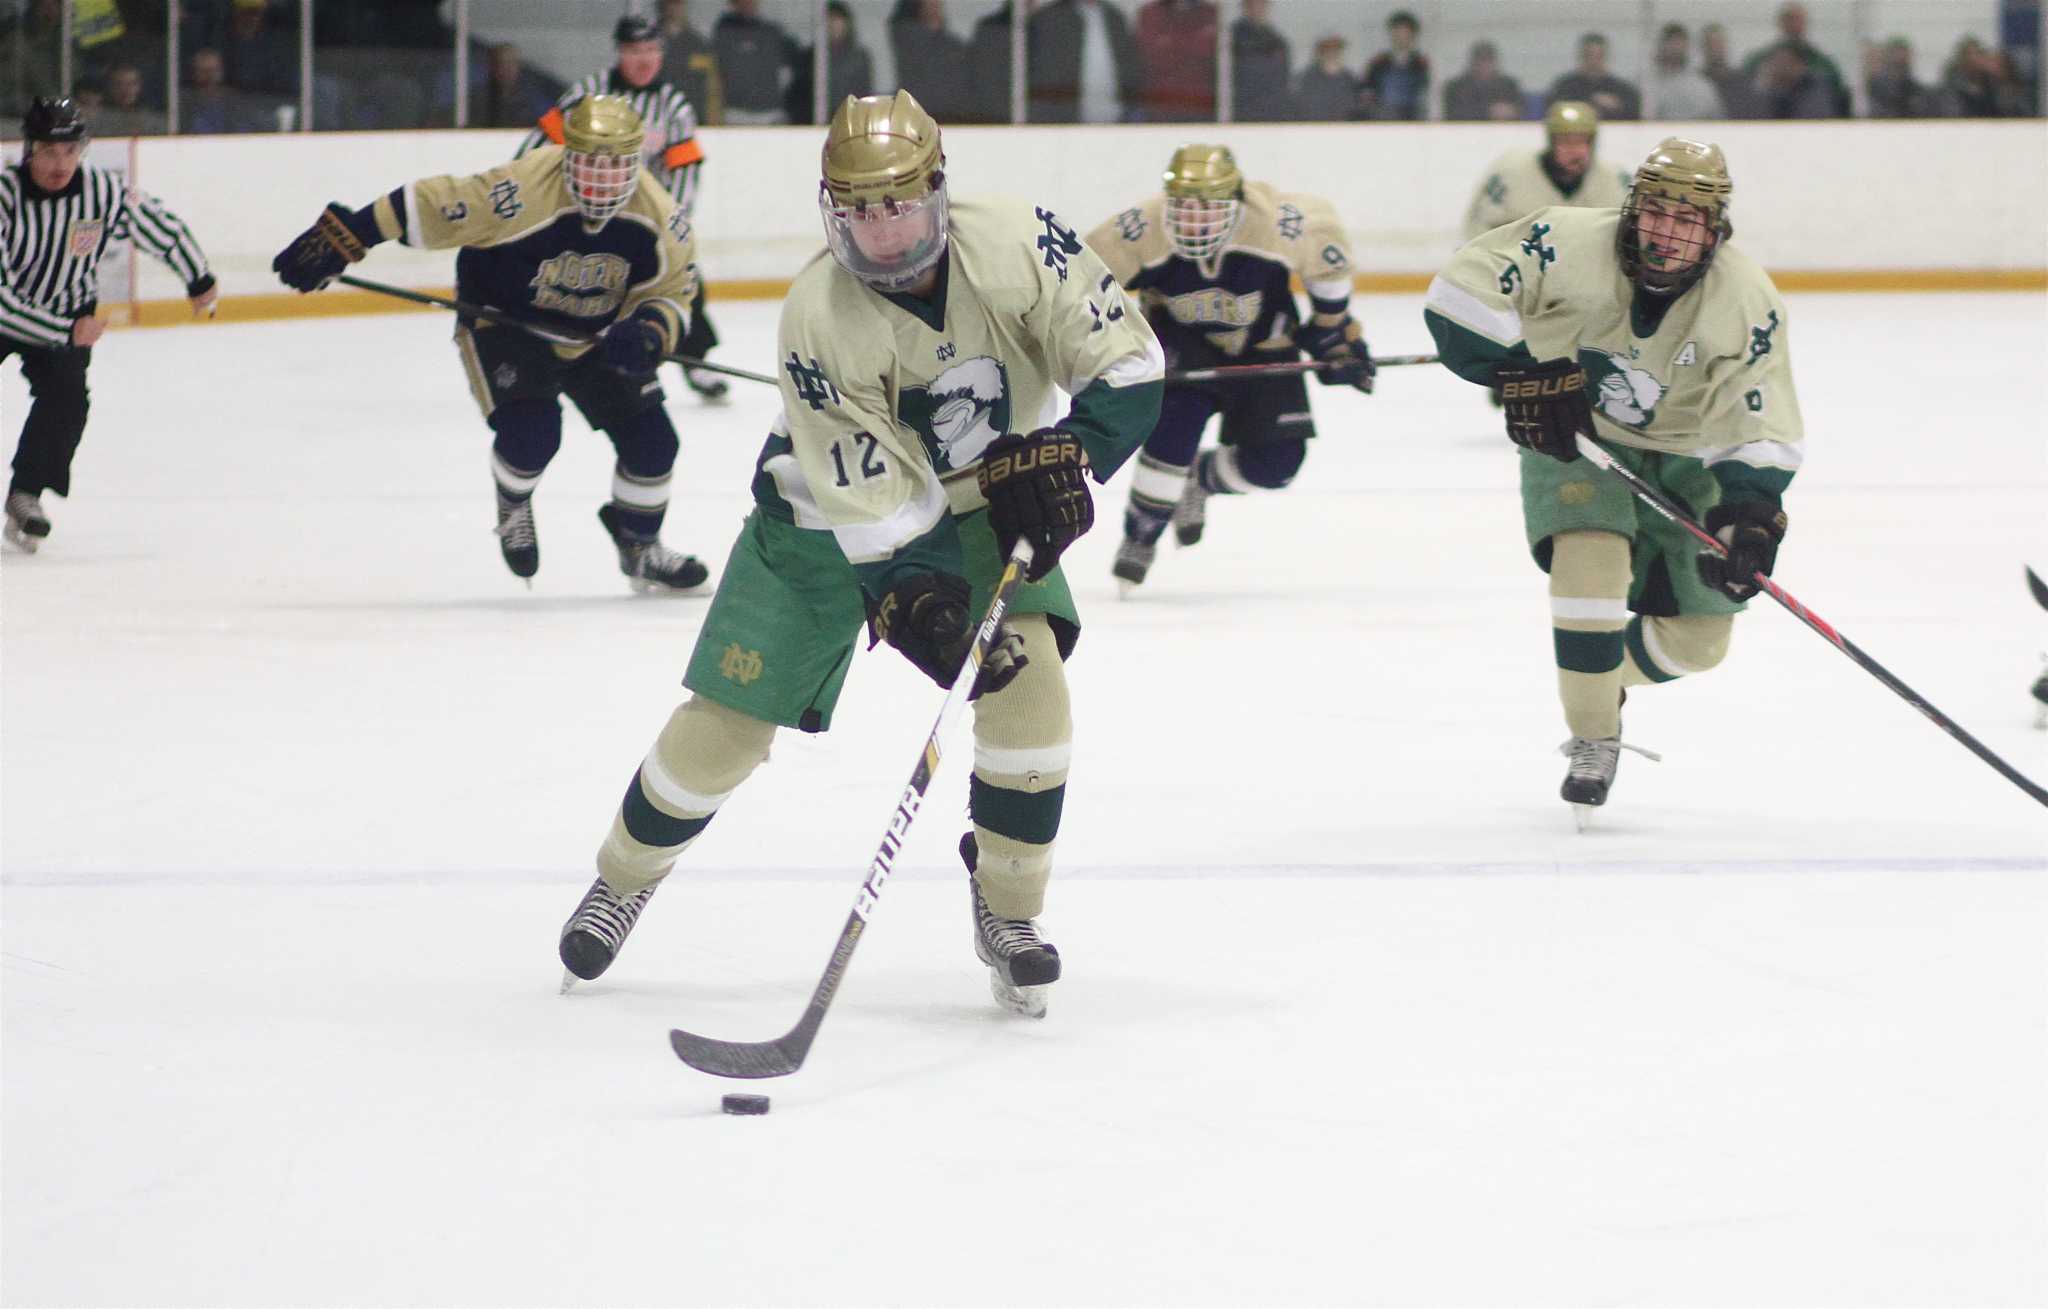 CIAC Hockey Tournament Outlook and Predictions SCCSWC will dominate